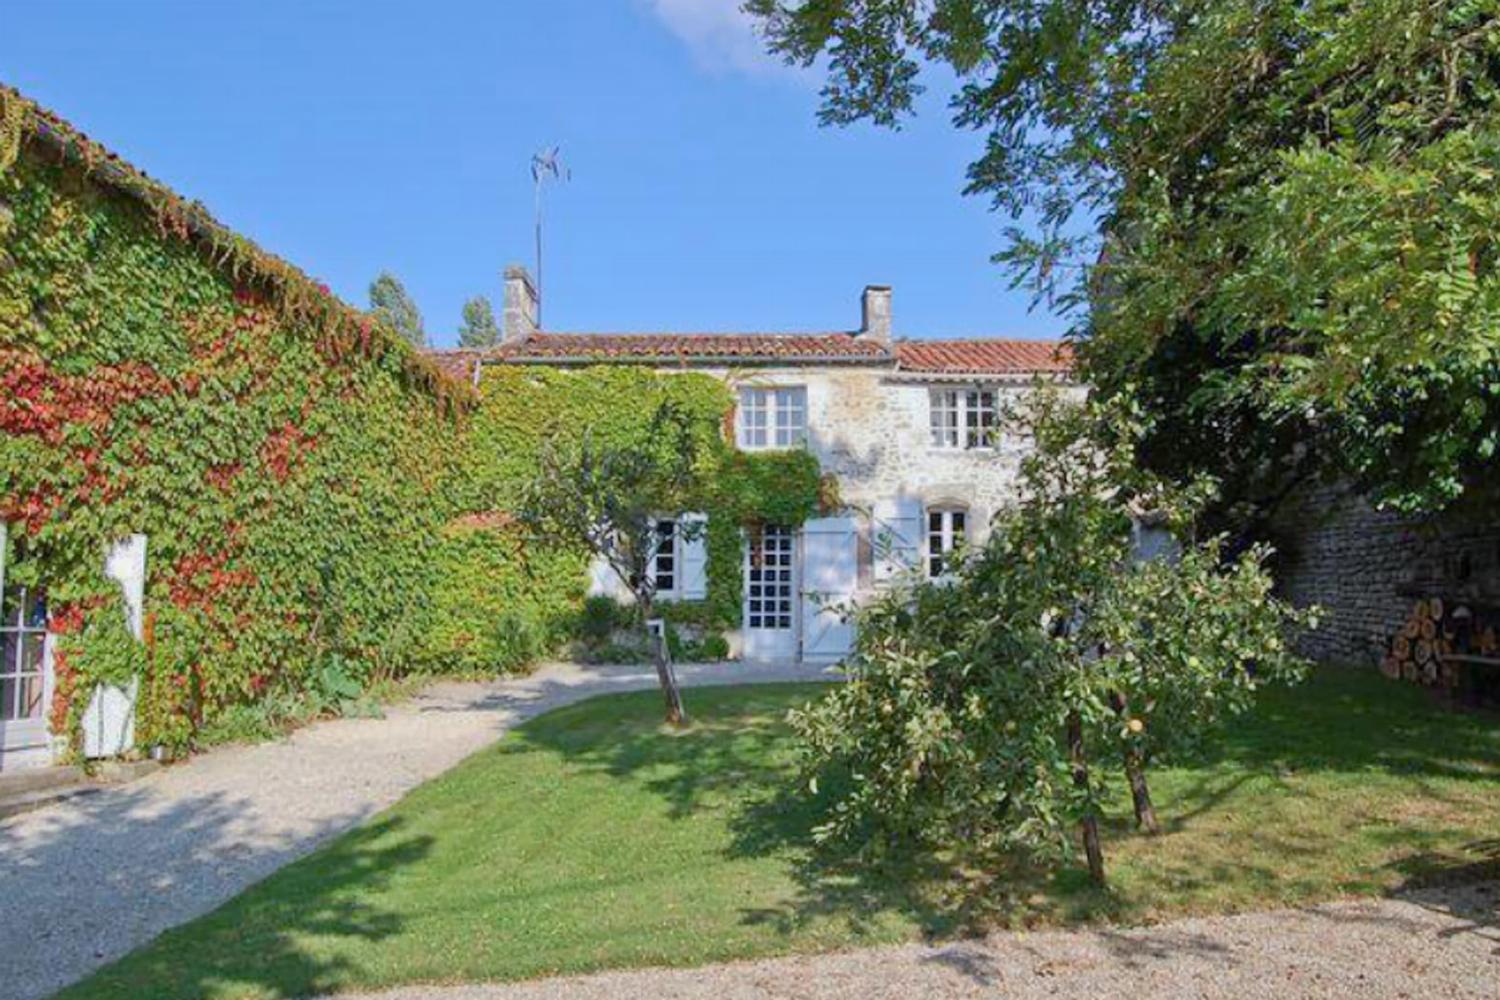 Rental accommodation in Charente